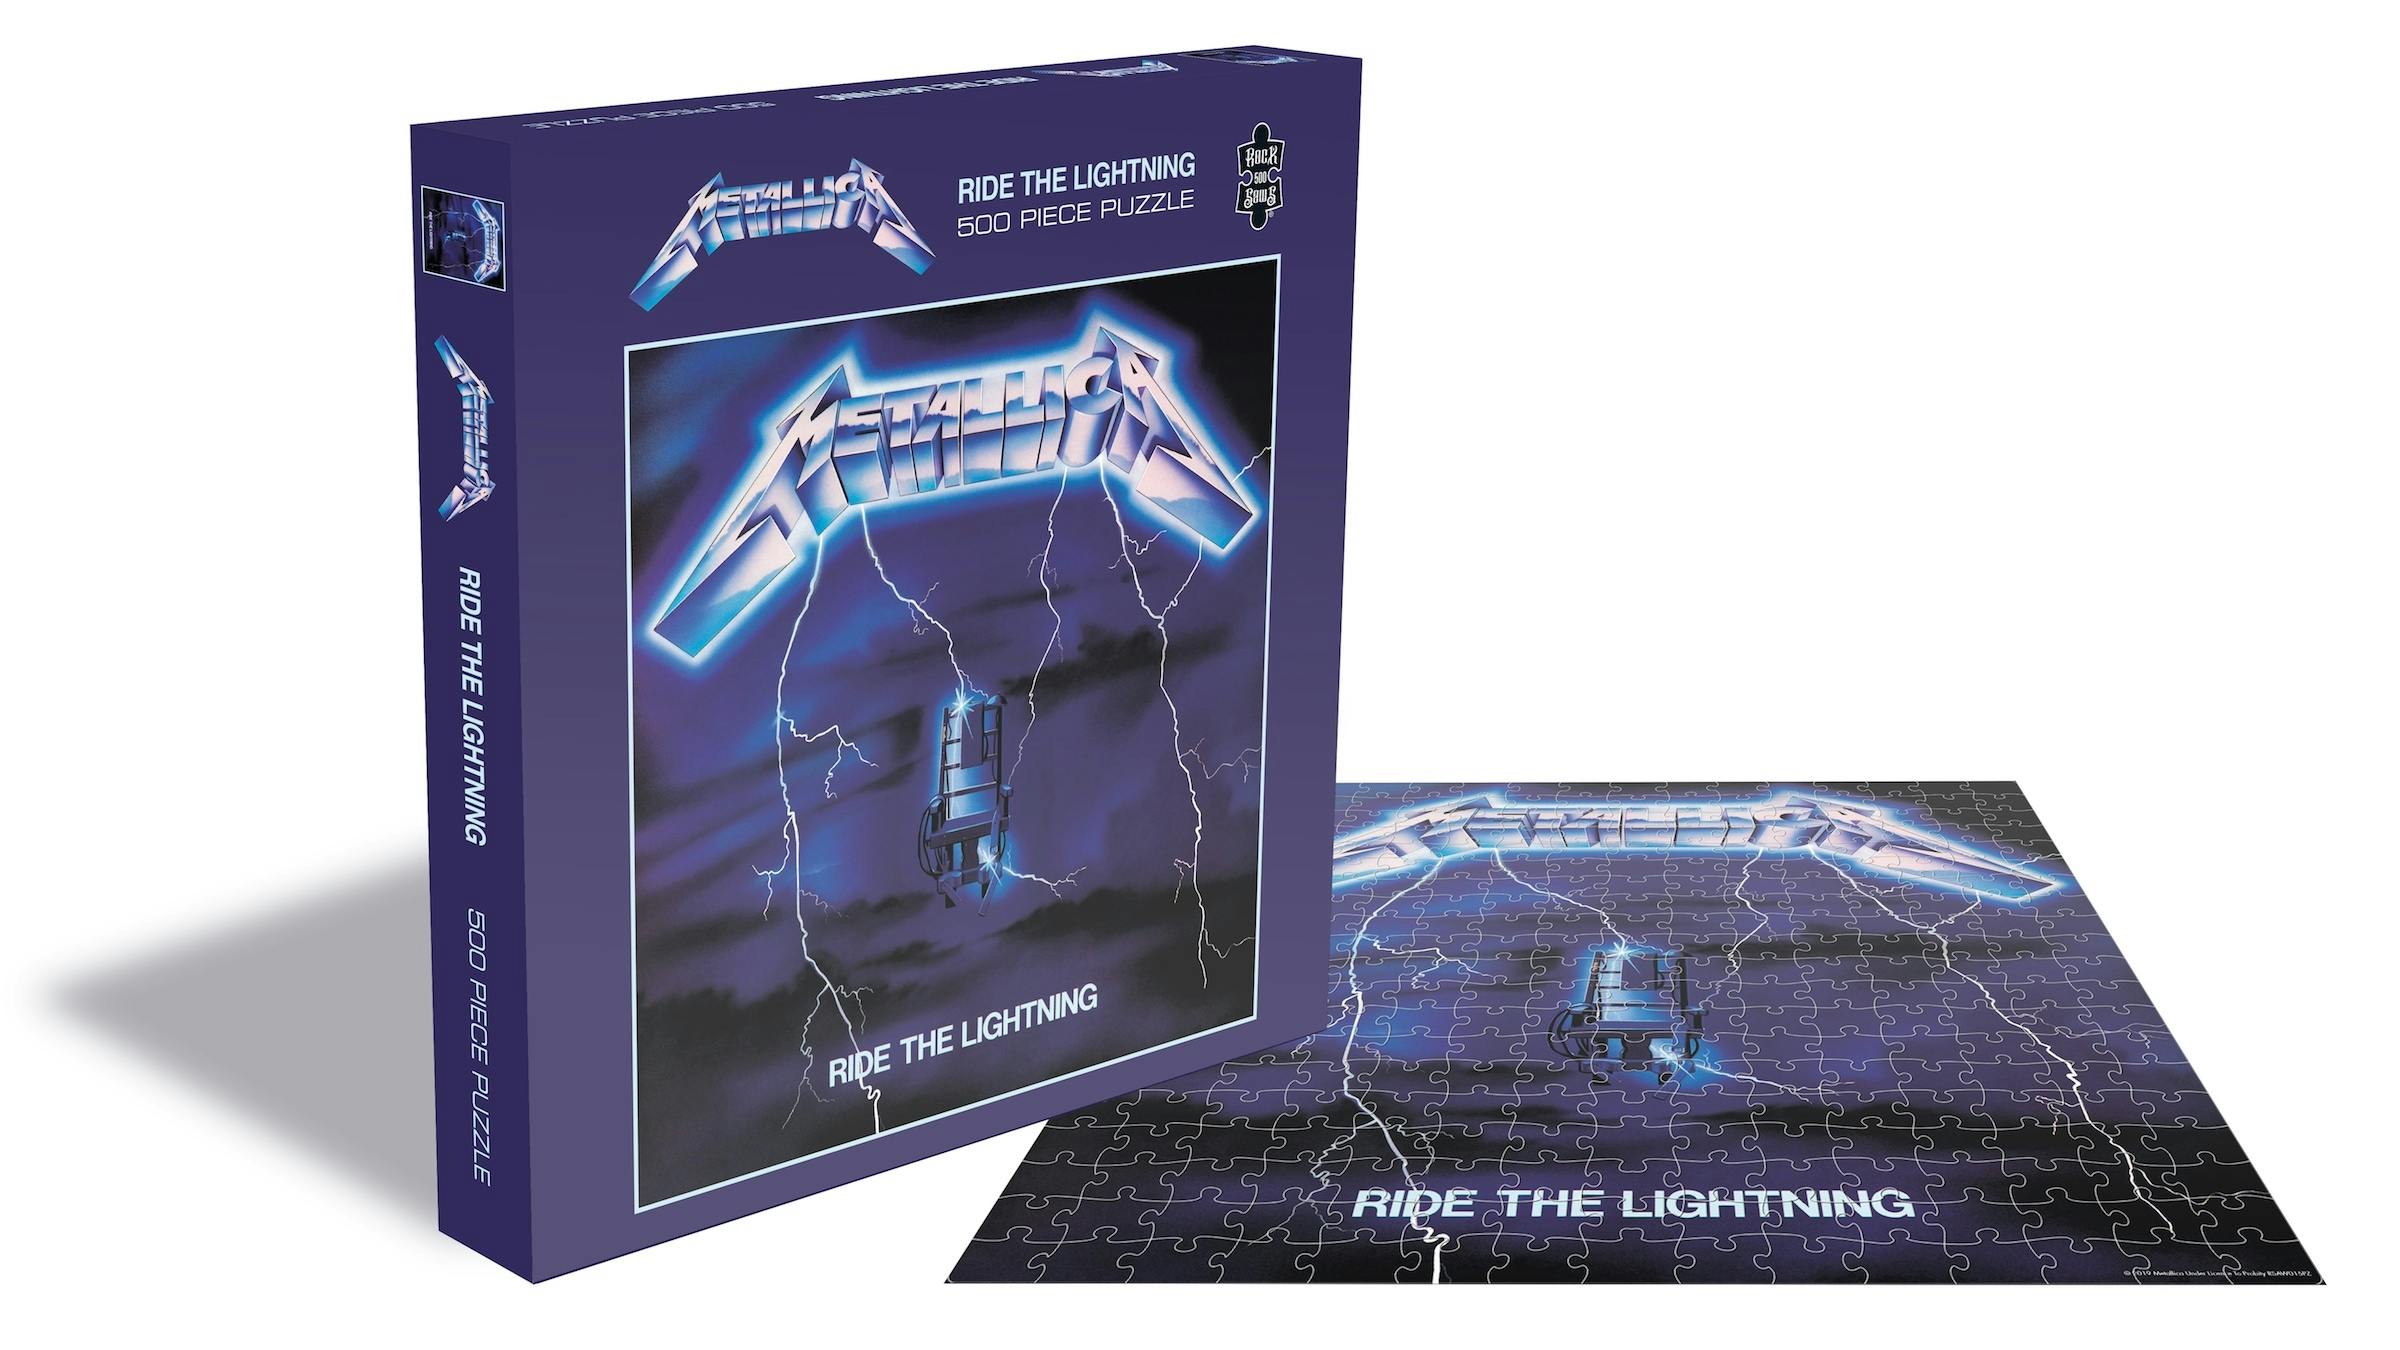 The First Four Metallica Albums' Covers Are Now Jigsaw Puzzles